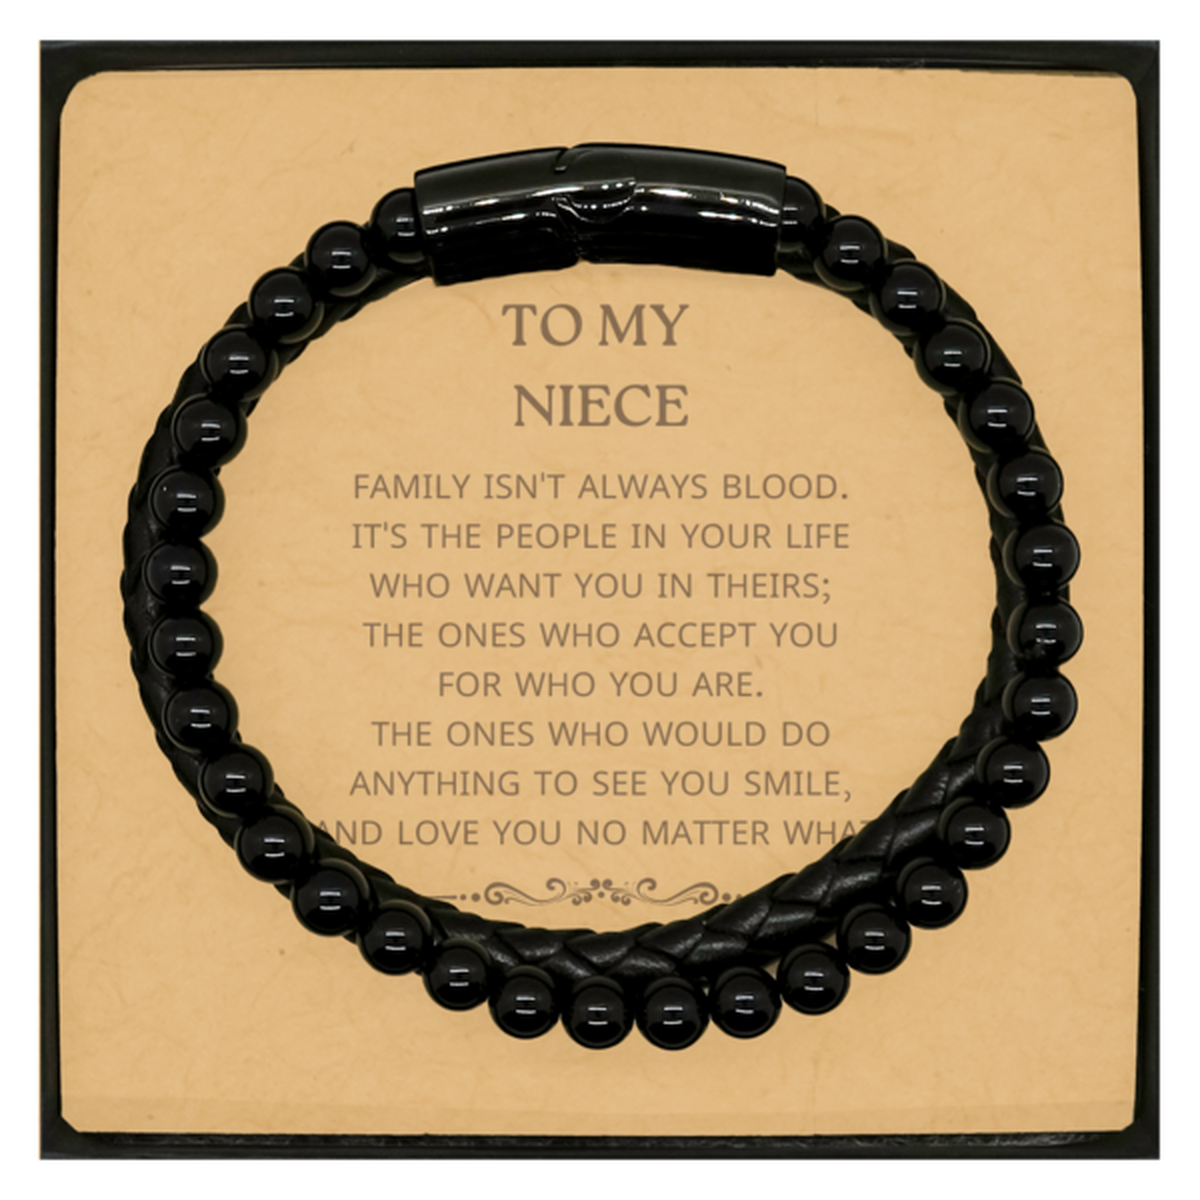 To My Niece Gifts, Family isn't always blood, Niece Stone Leather Bracelets, Birthday Christmas Unique Present For Niece